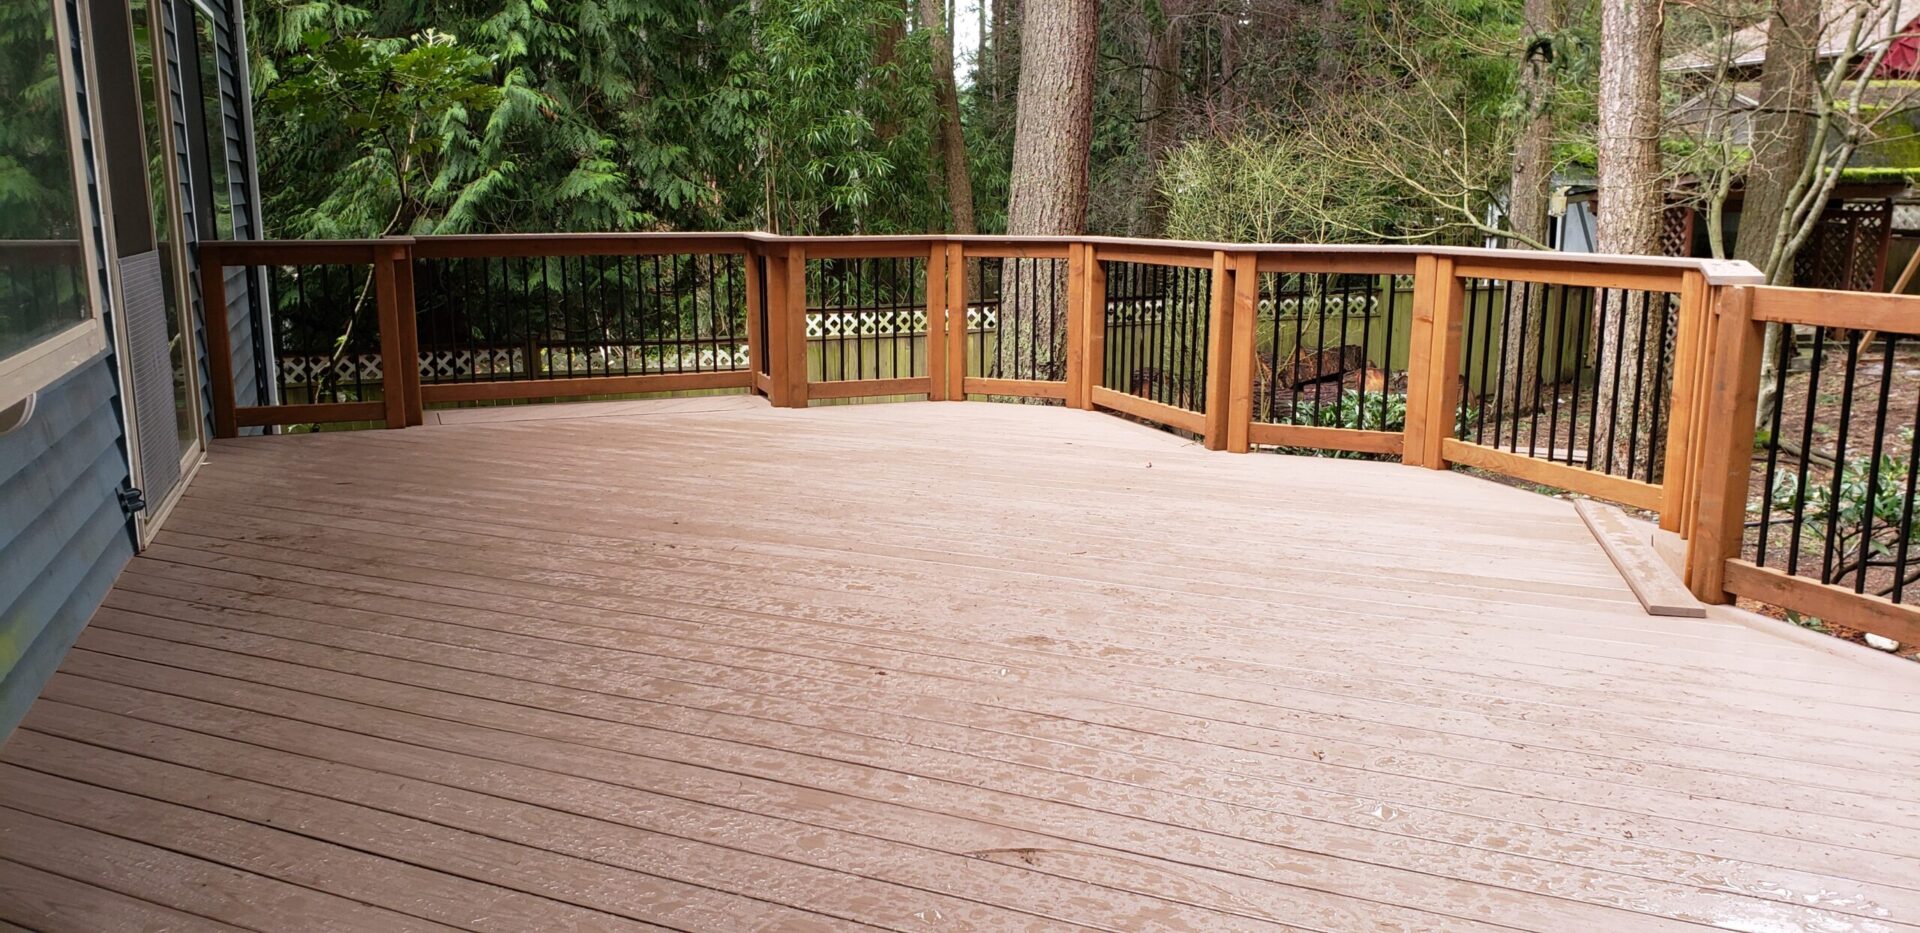 Composite Decking With Brown Color Railing